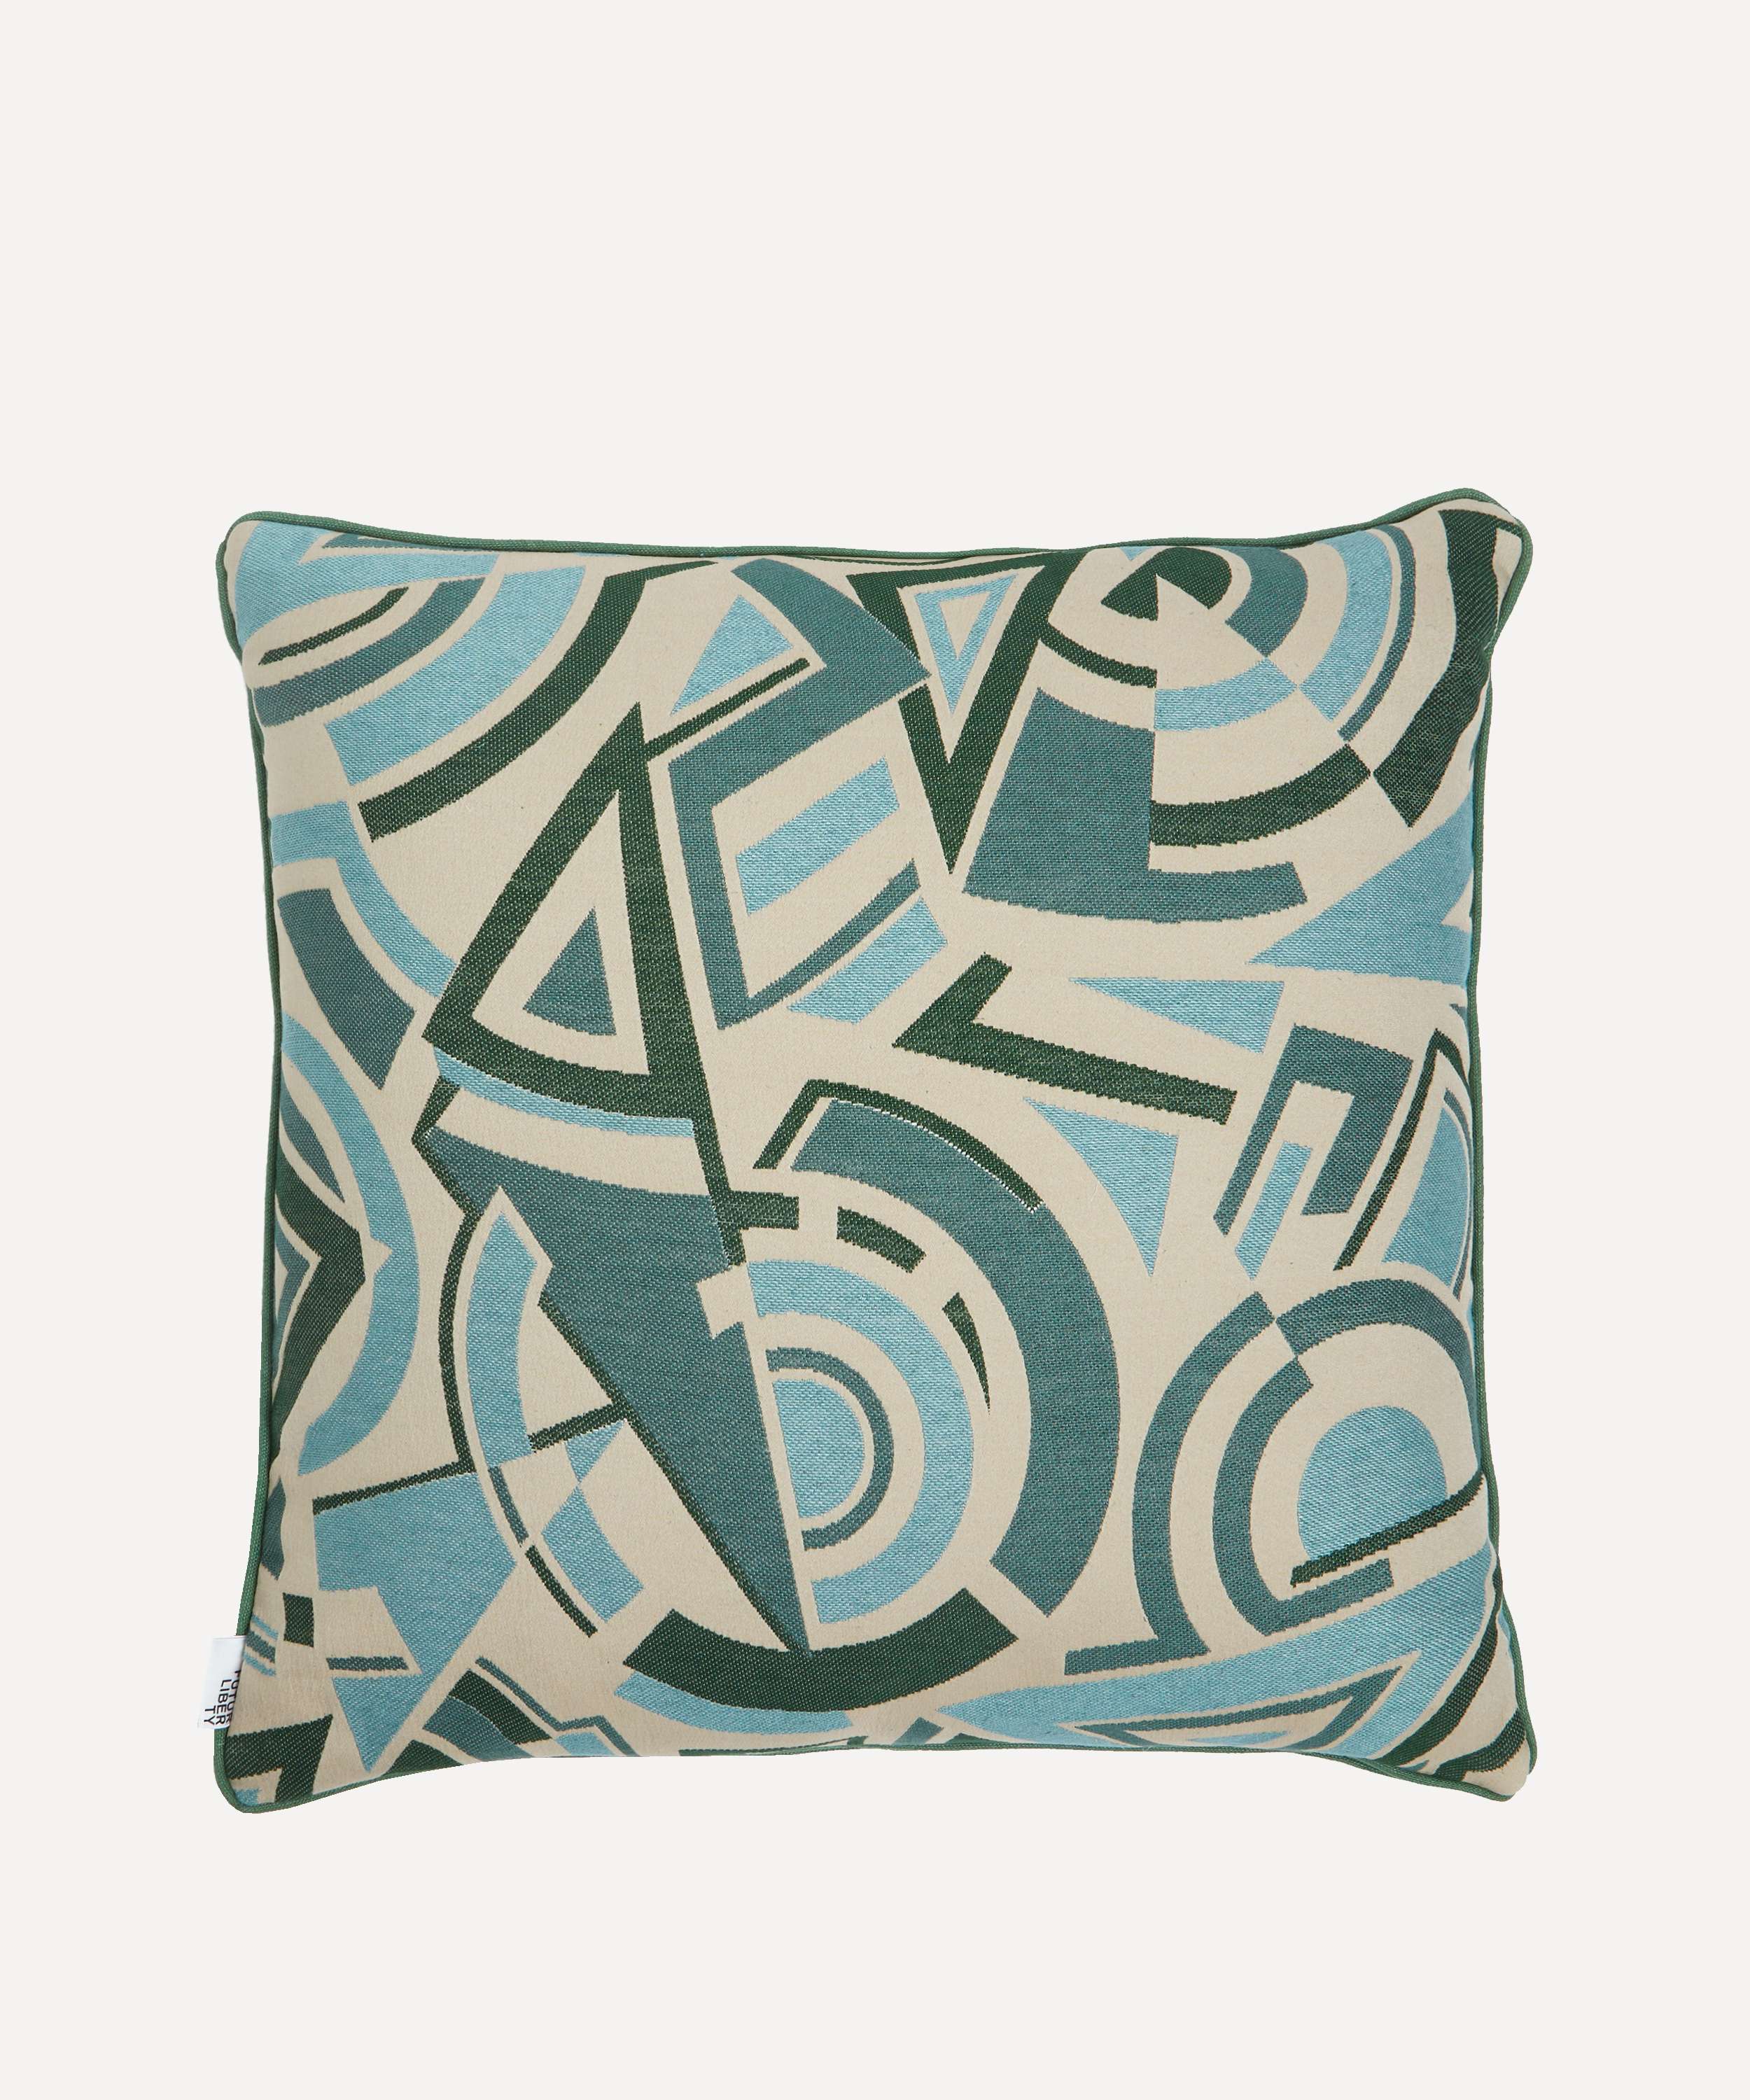 Floor Pillows And Cushions: Inspirations That Exude Class And